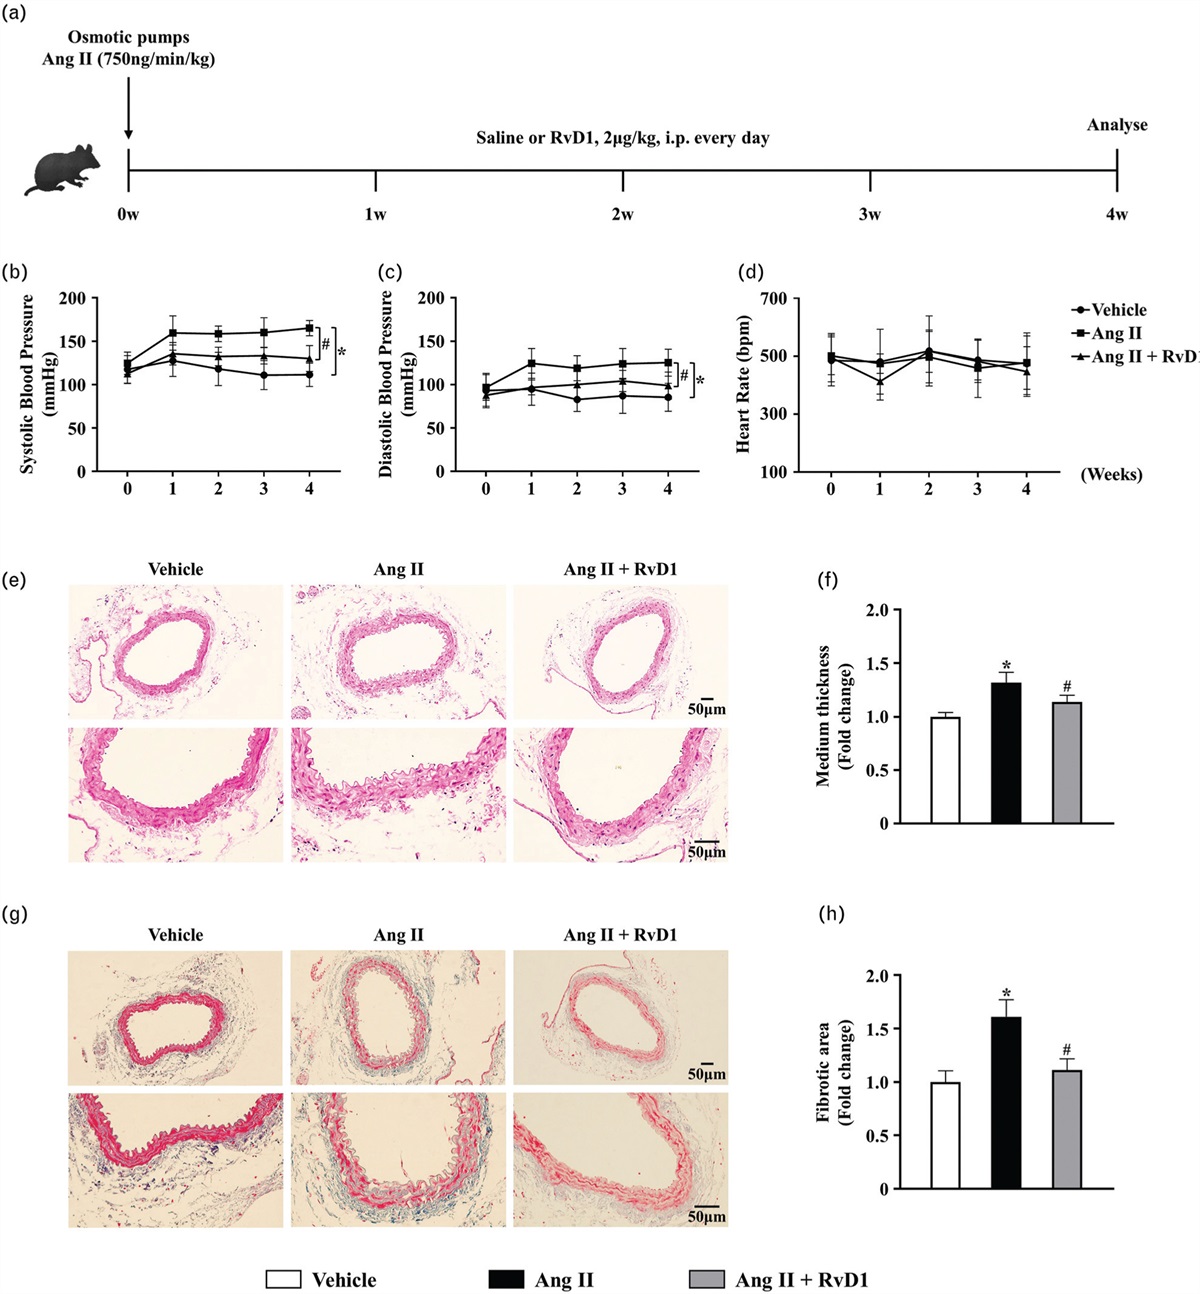 Resolvin D1 attenuates Ang II-induced hypertension in mice by inhibiting the proliferation, migration and phenotypic transformation of vascular smooth muscle cells by blocking the RhoA/mitogen-activated protein kinase pathway